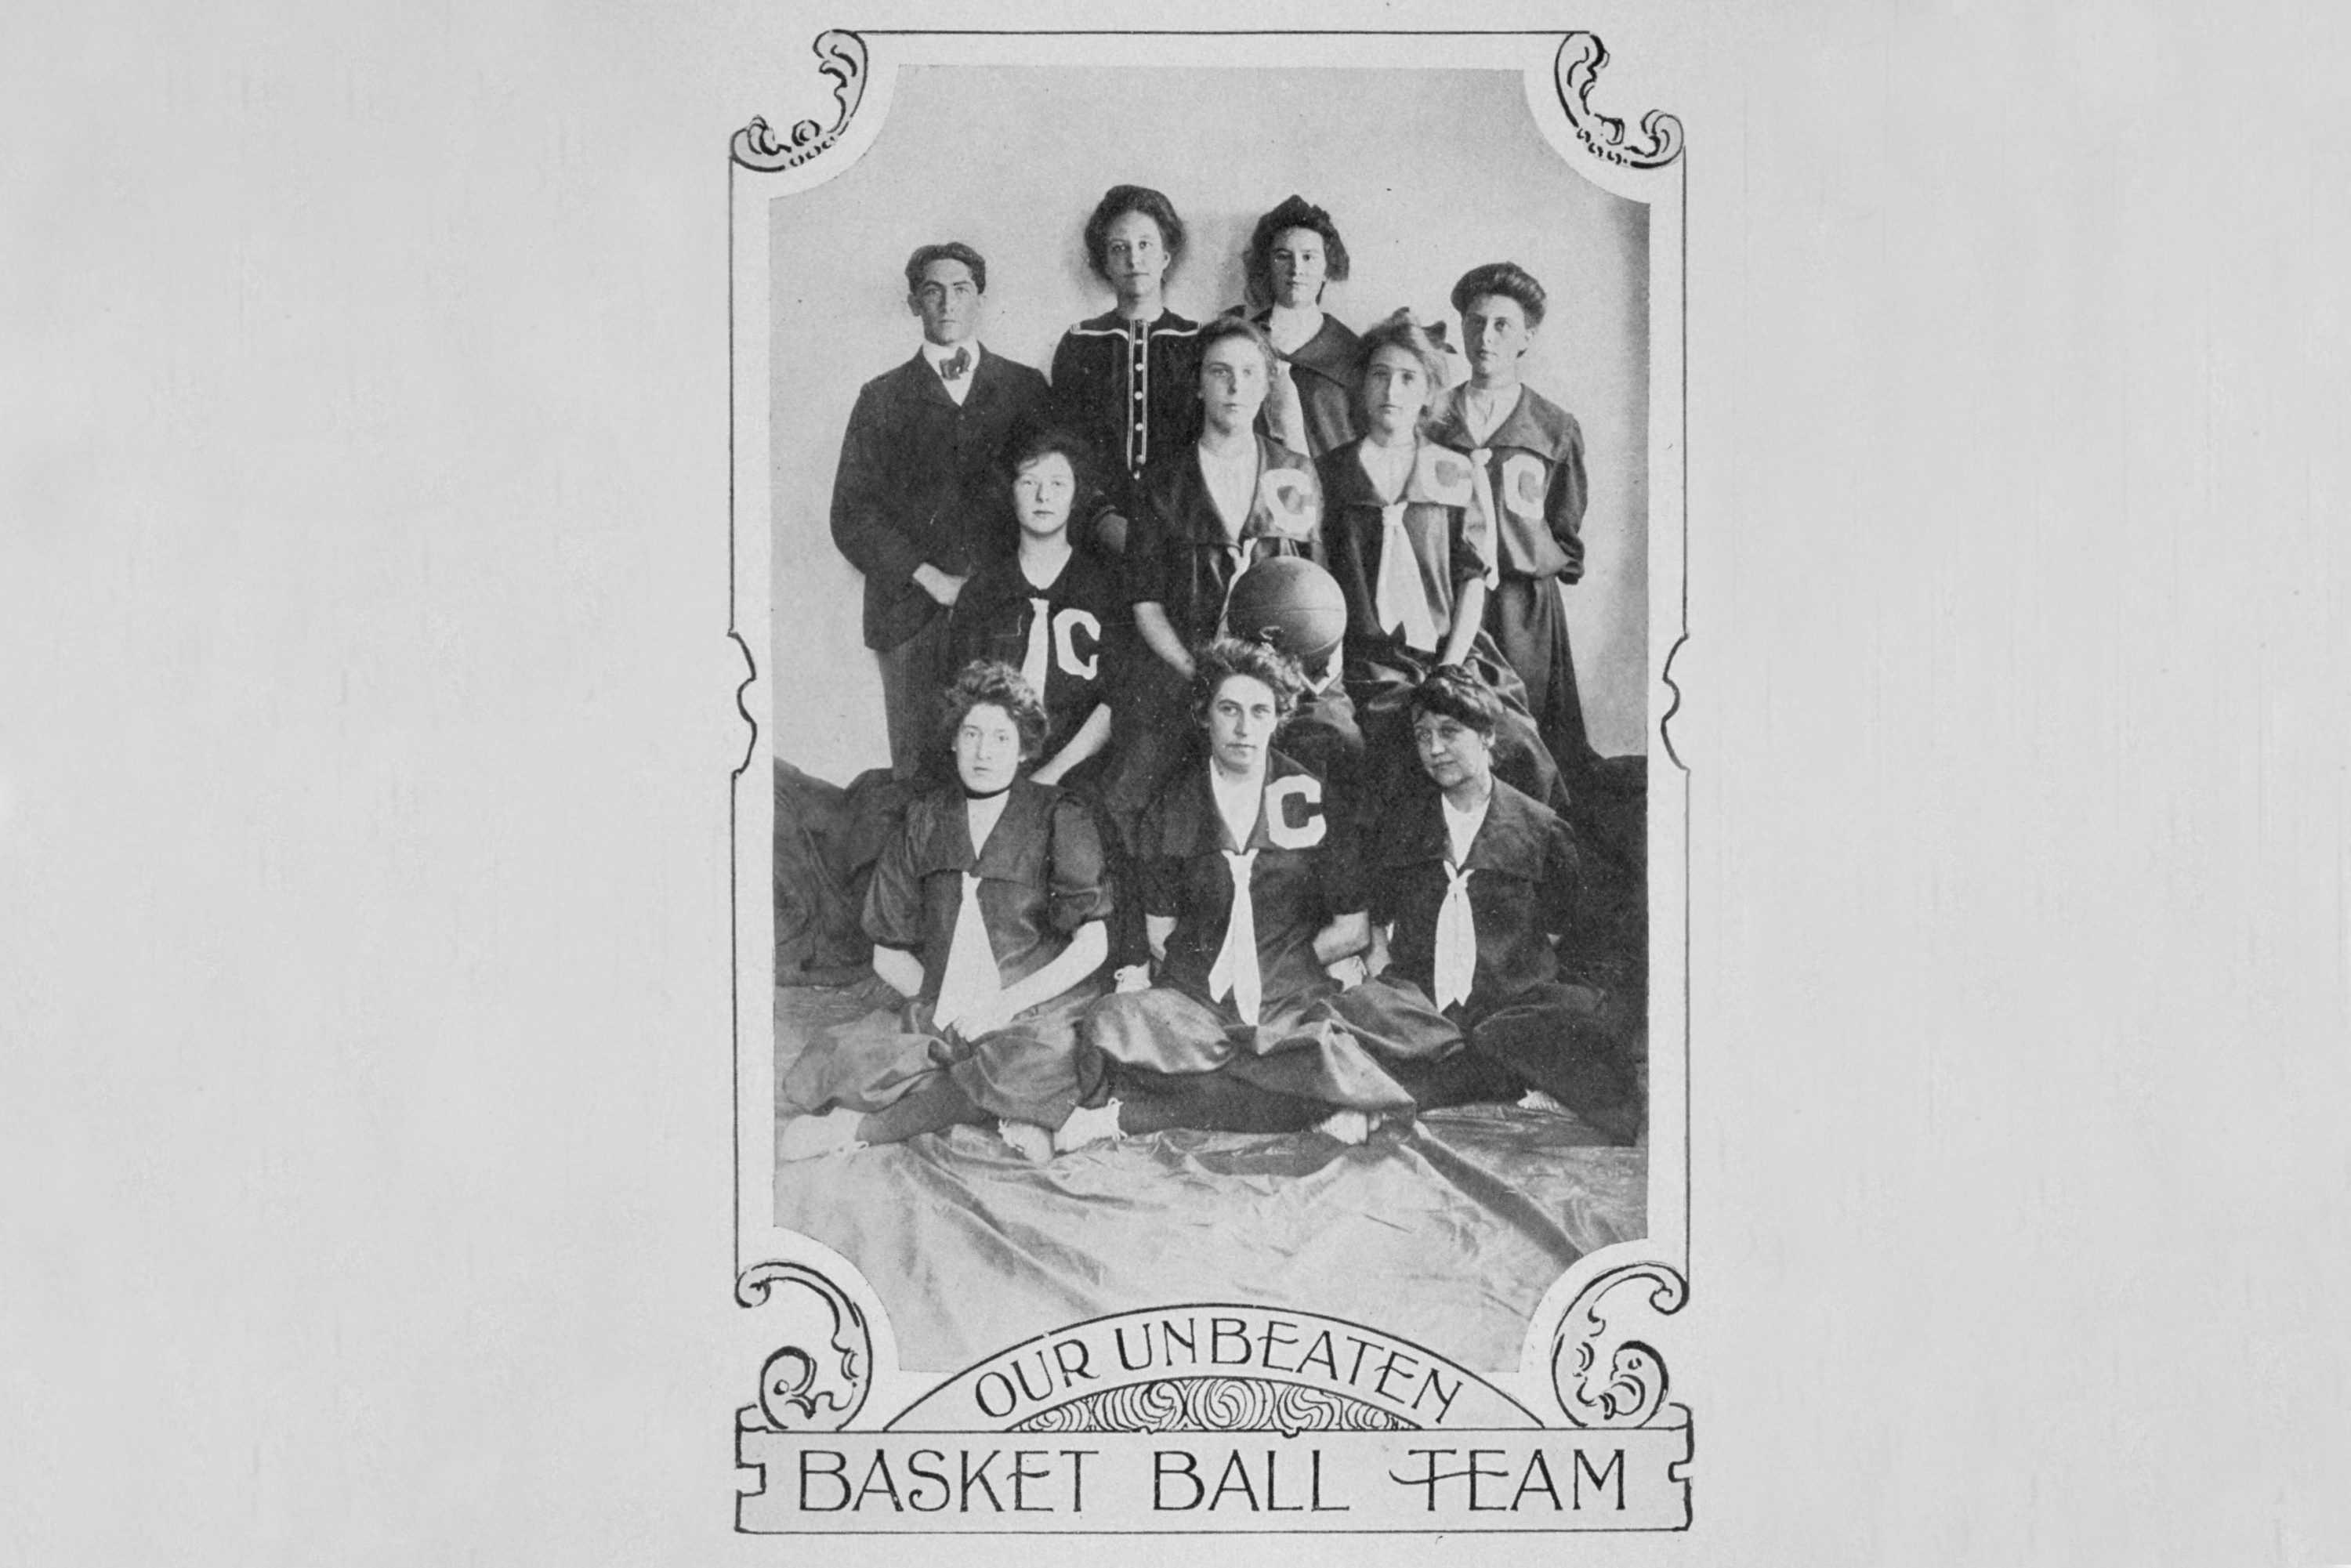 As we celebrate our women's basketball team equaling their previous unbeaten record of 90 games, we look back to the very earliest days of women's basketball in Storrs, when the team boasted an unbeaten season as far back as 1902. (Archives & Special Collections, University Library)